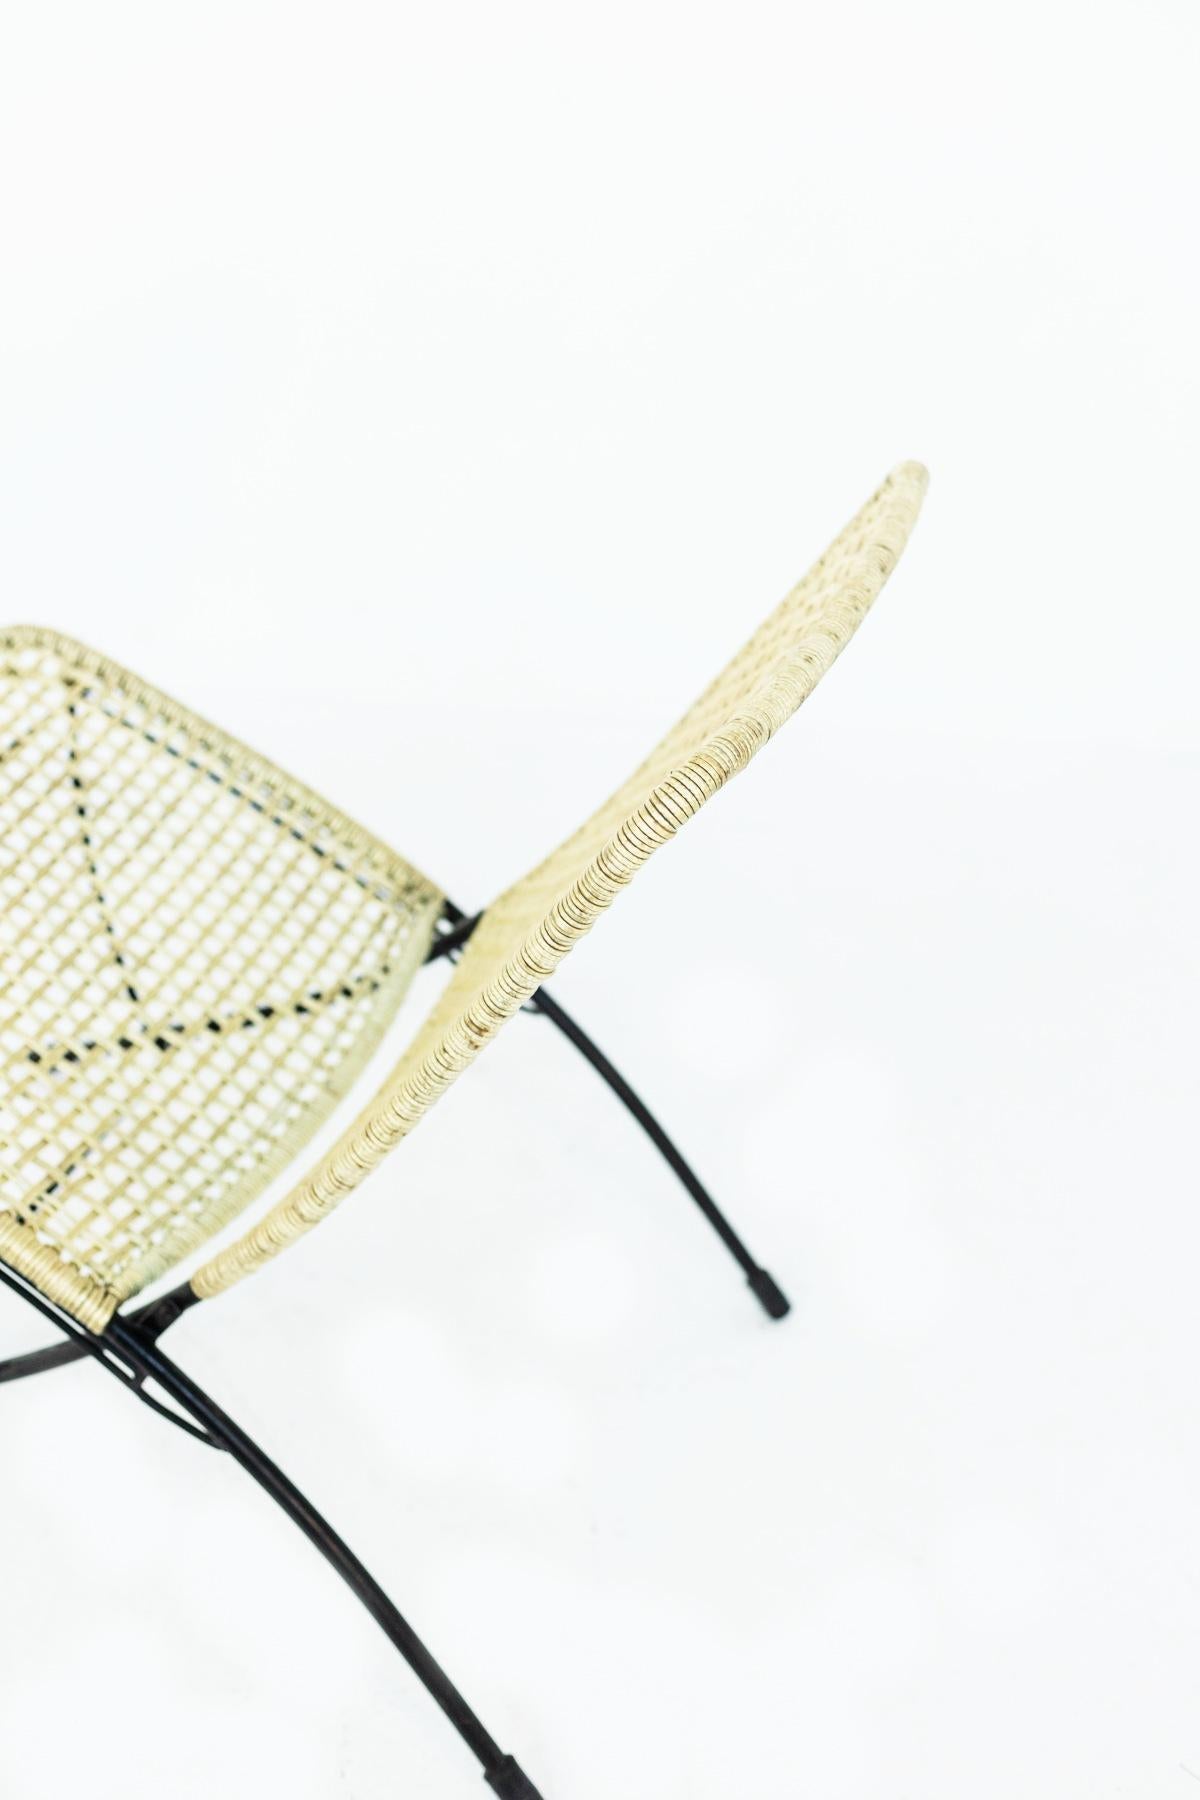 Mid-20th Century Vintage Italian Outdoor Armchairs in Iron and Plastic Rope